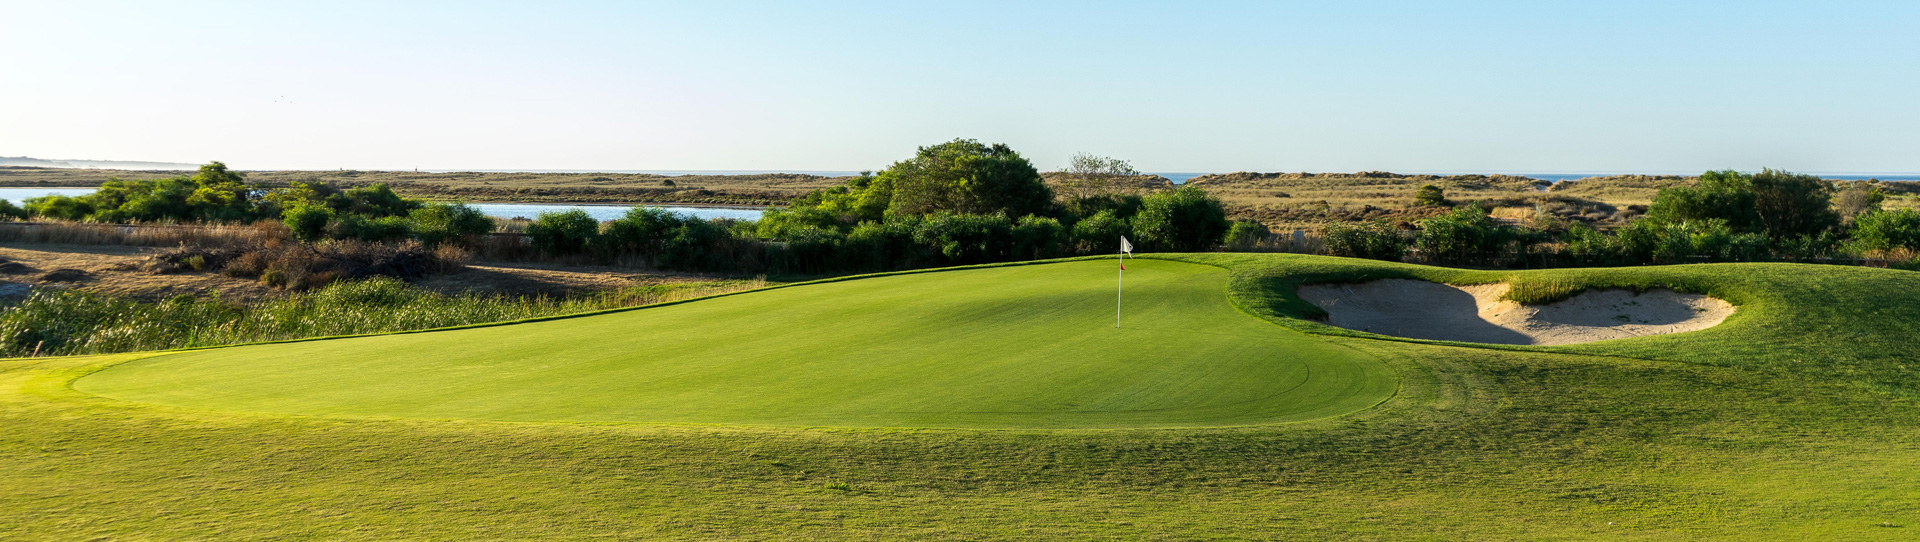 Portugal golf holidays - Palmares Duo Experience - Photo 2